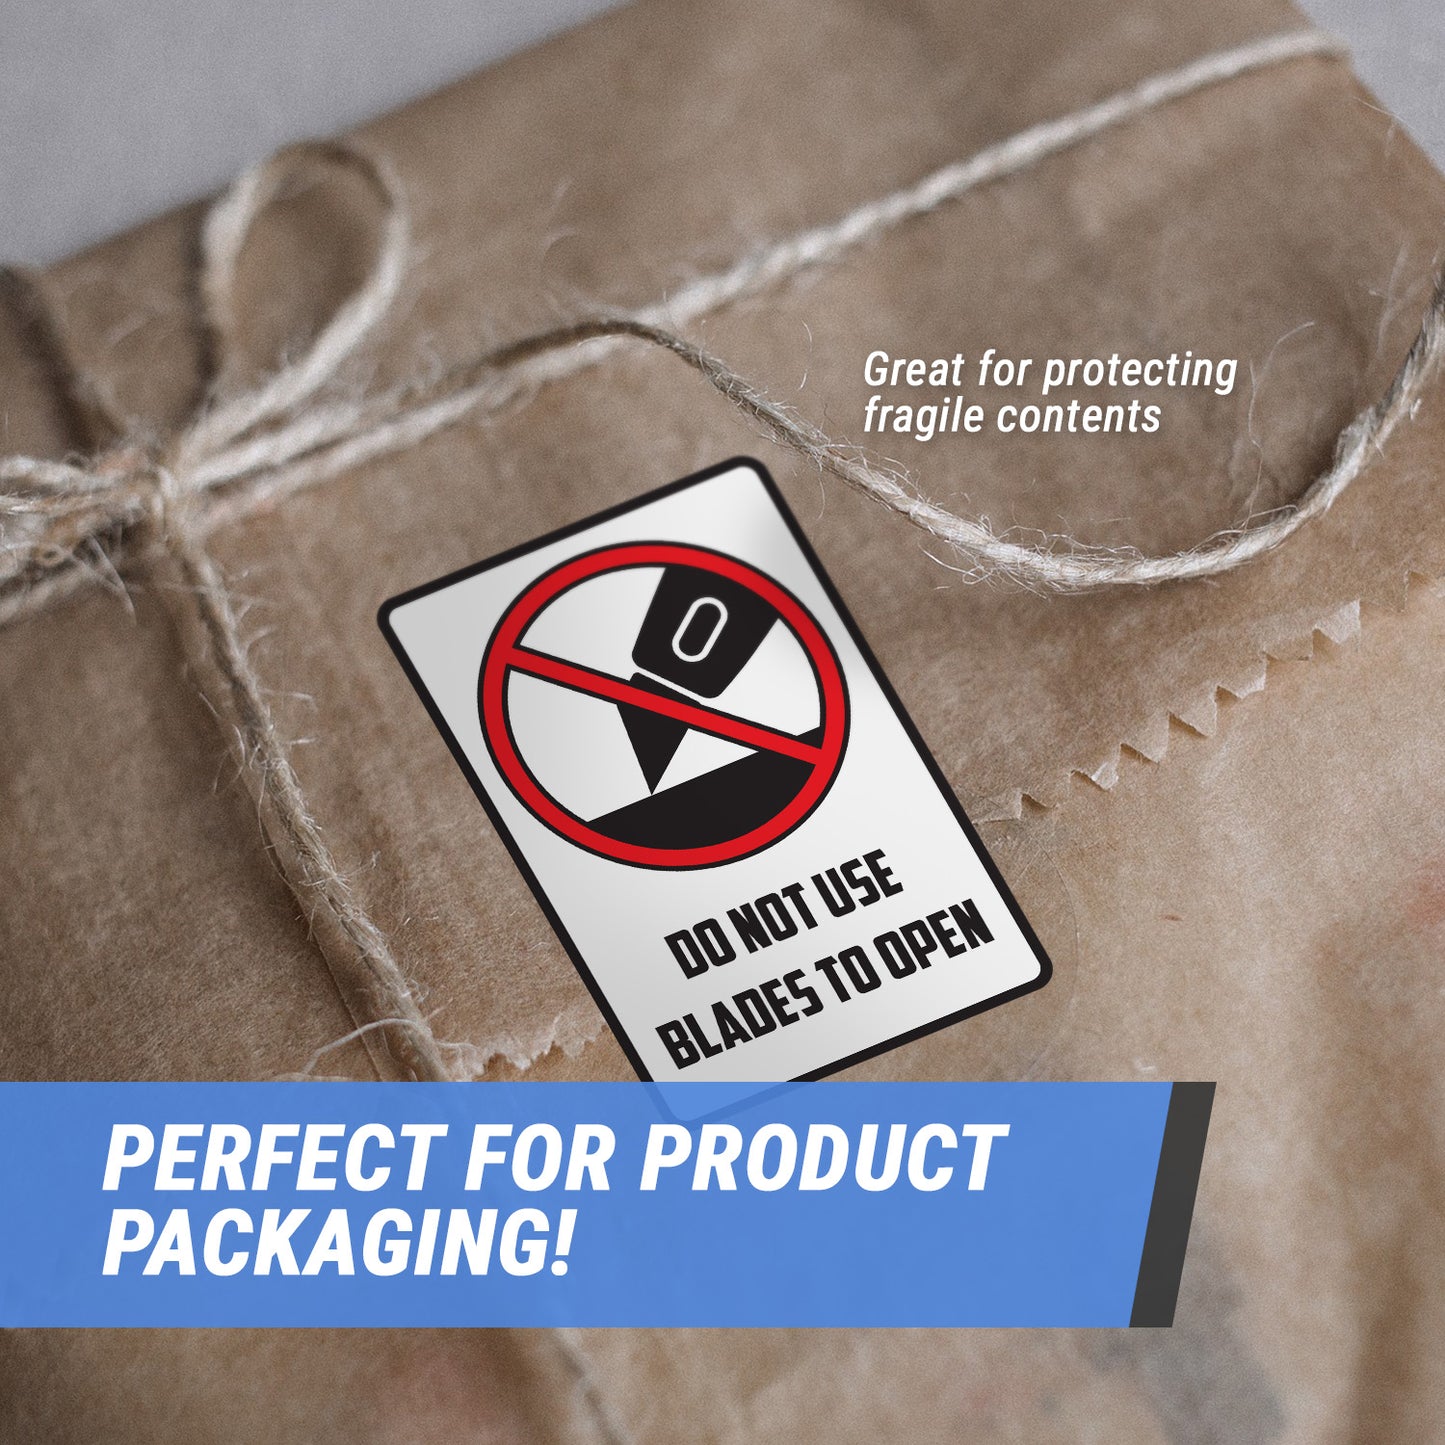 2 x 3 inch | Shipping & Handling: Do Not Use Blade Stickers